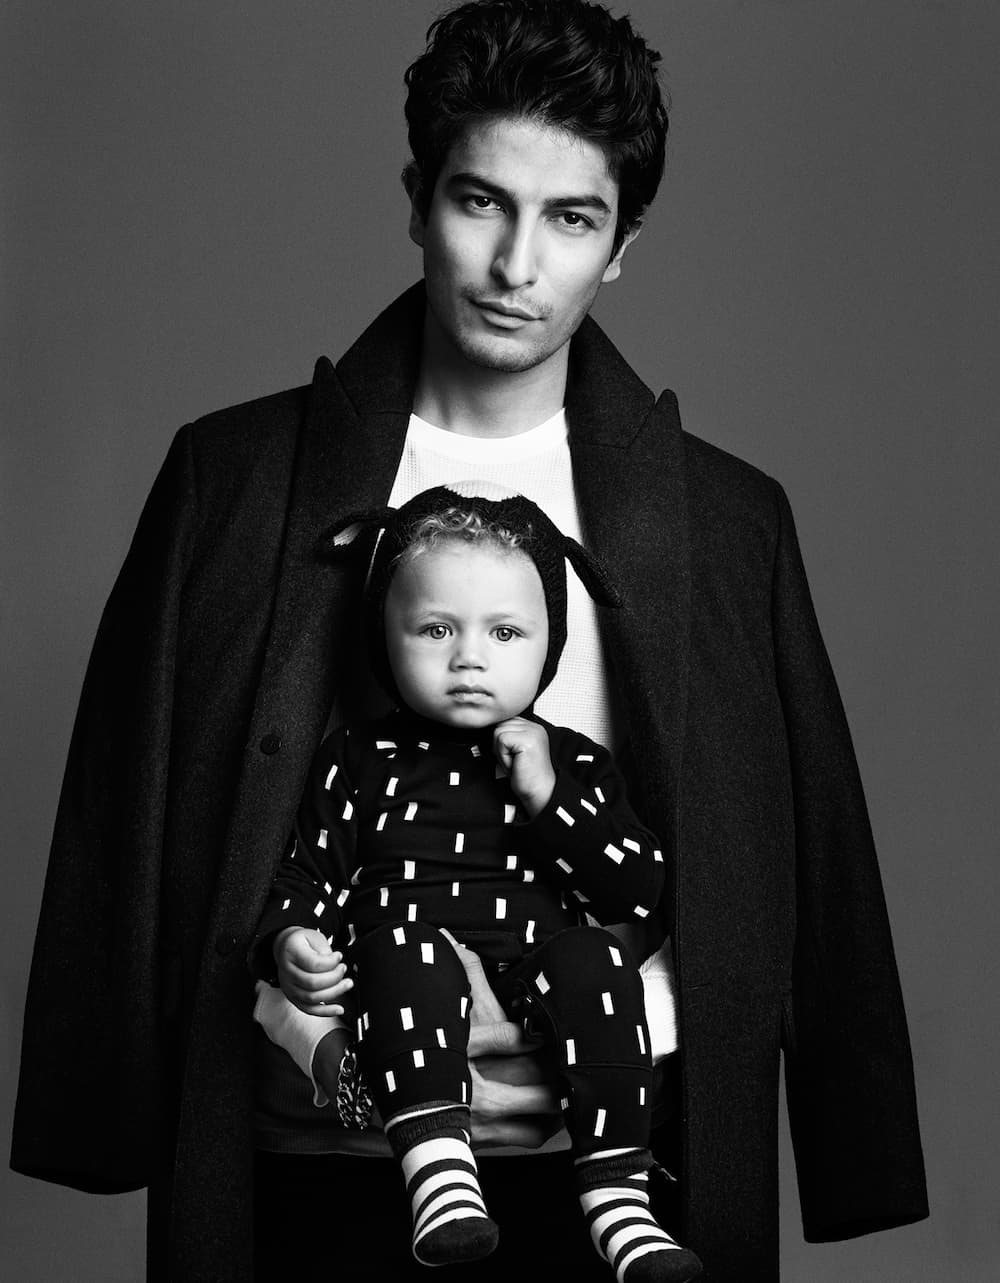 GentleMan by photographer Zoe Adlersberg & stylist Maria Walker. creating a series of striking black and white portraits of men with babies.